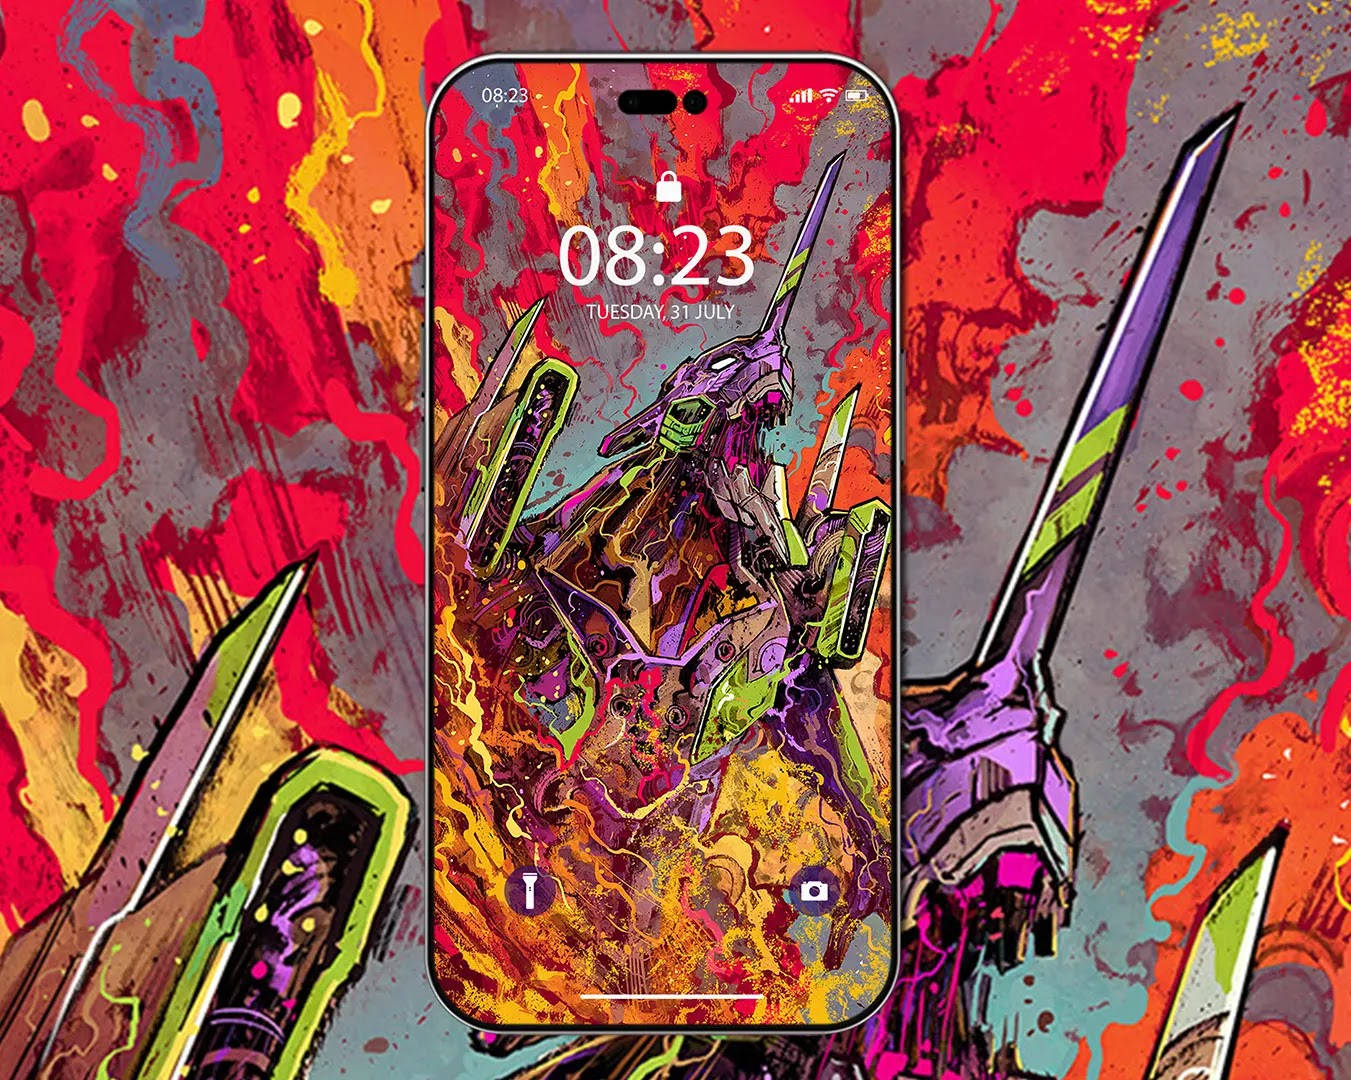 Level up your smartphone game with the Evangelion Phone Wallpaper